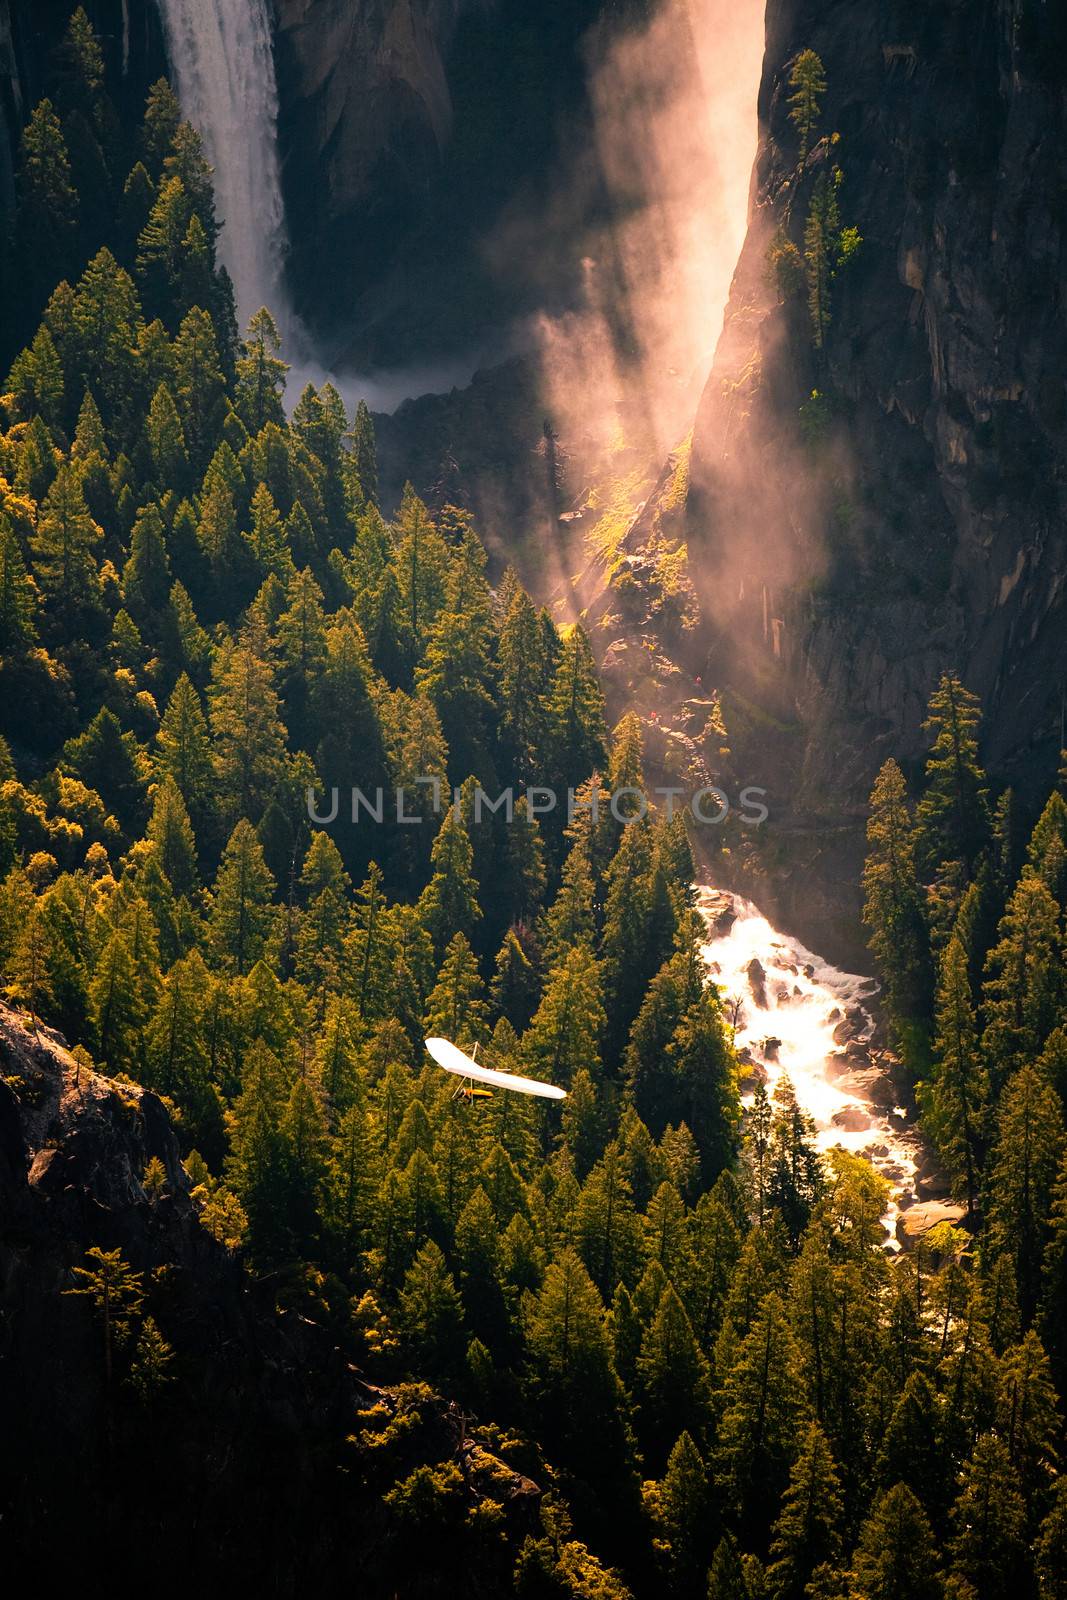 View from above of a valley and waterfall from Glacier Point in Yosemite National Park, California, USA.